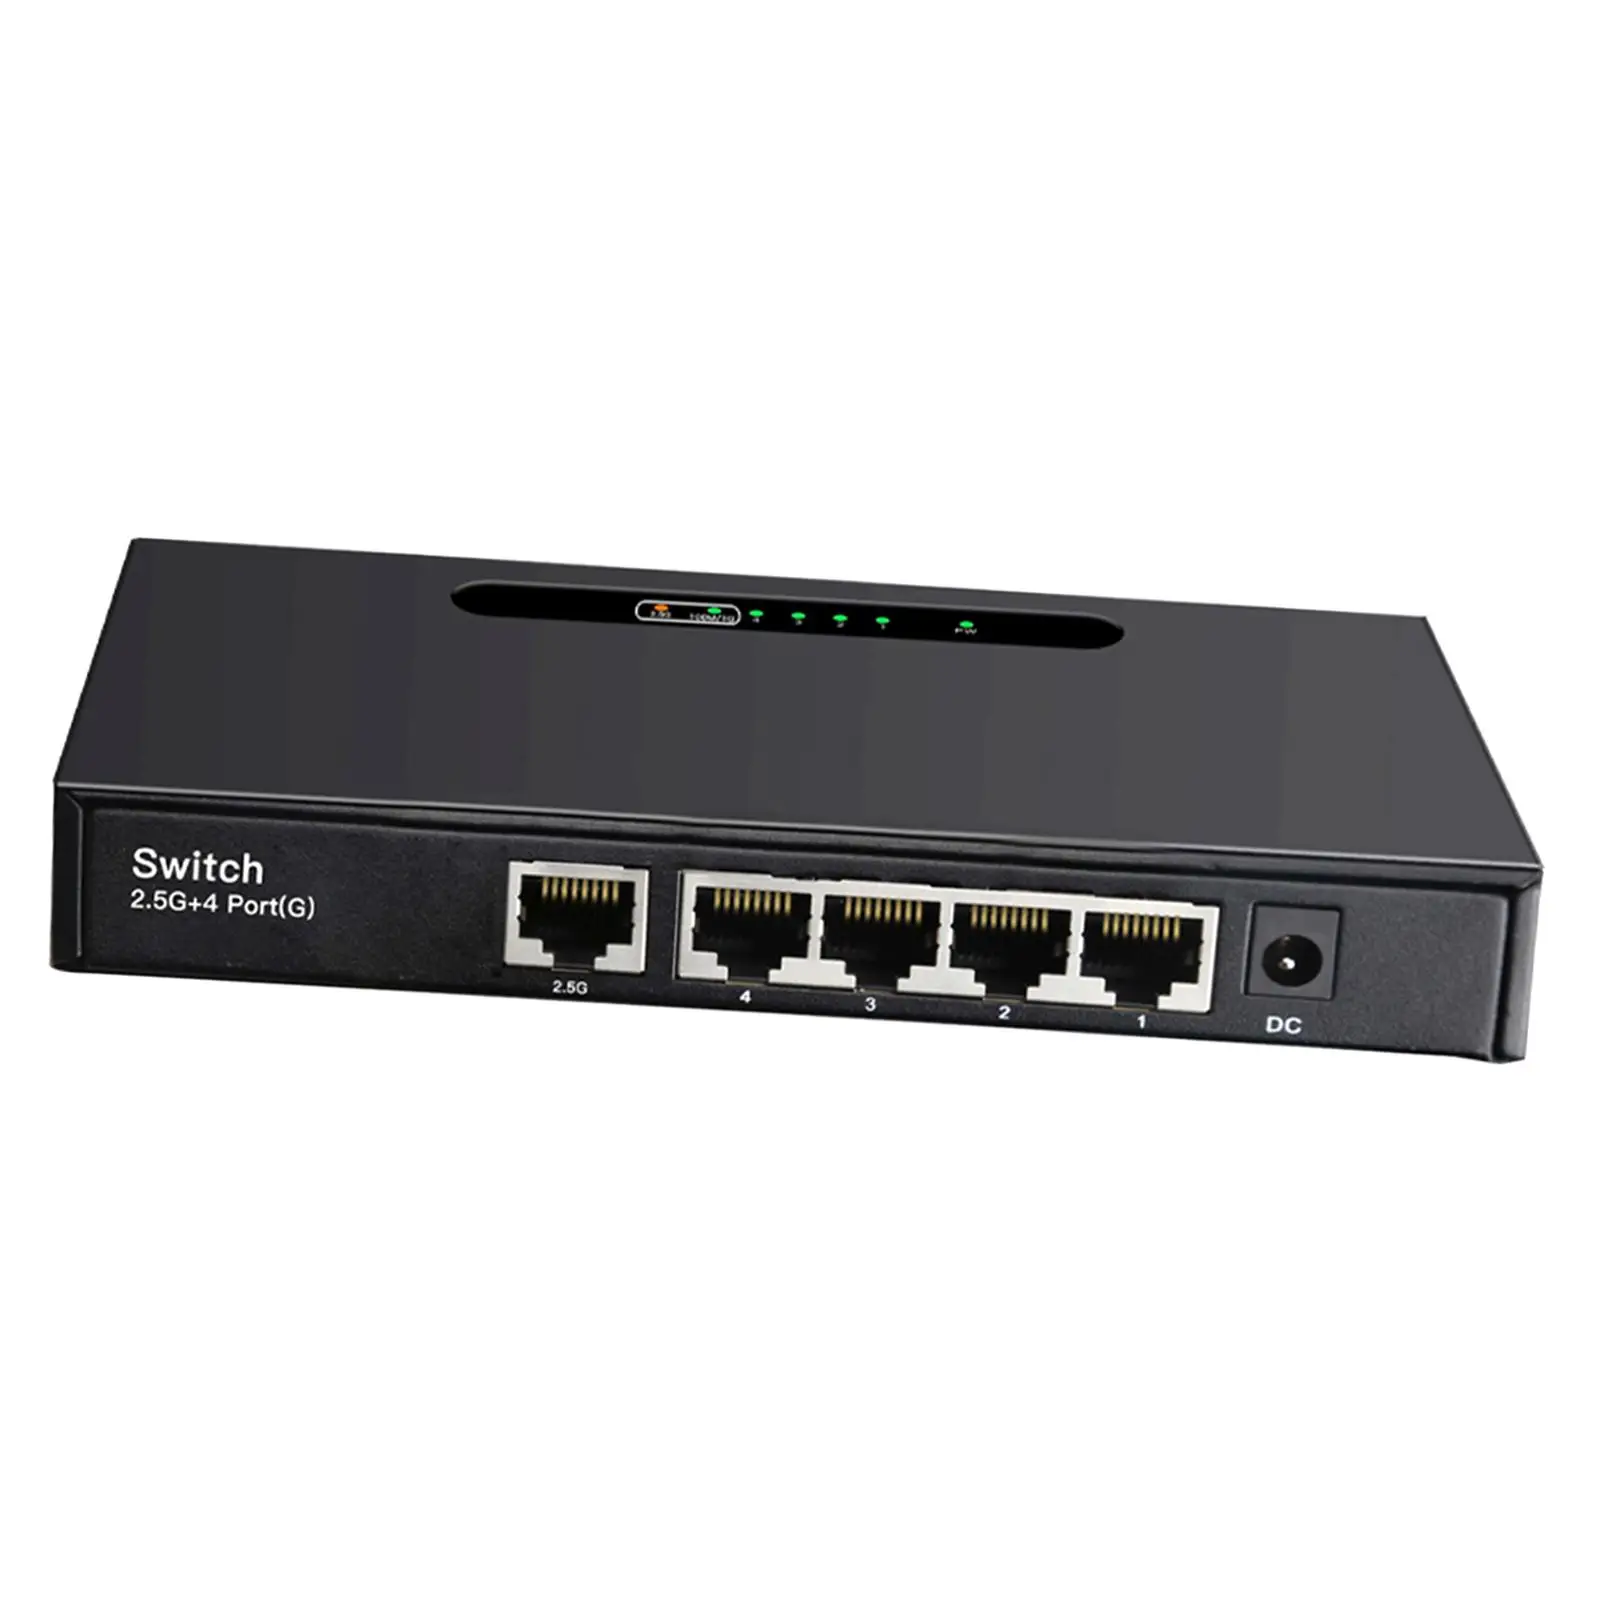 2.5G Gigabit Ethernet Switch Home Network Hub High Speed Ethernet Splitter Stable Plug and Play for Home Office Laptop